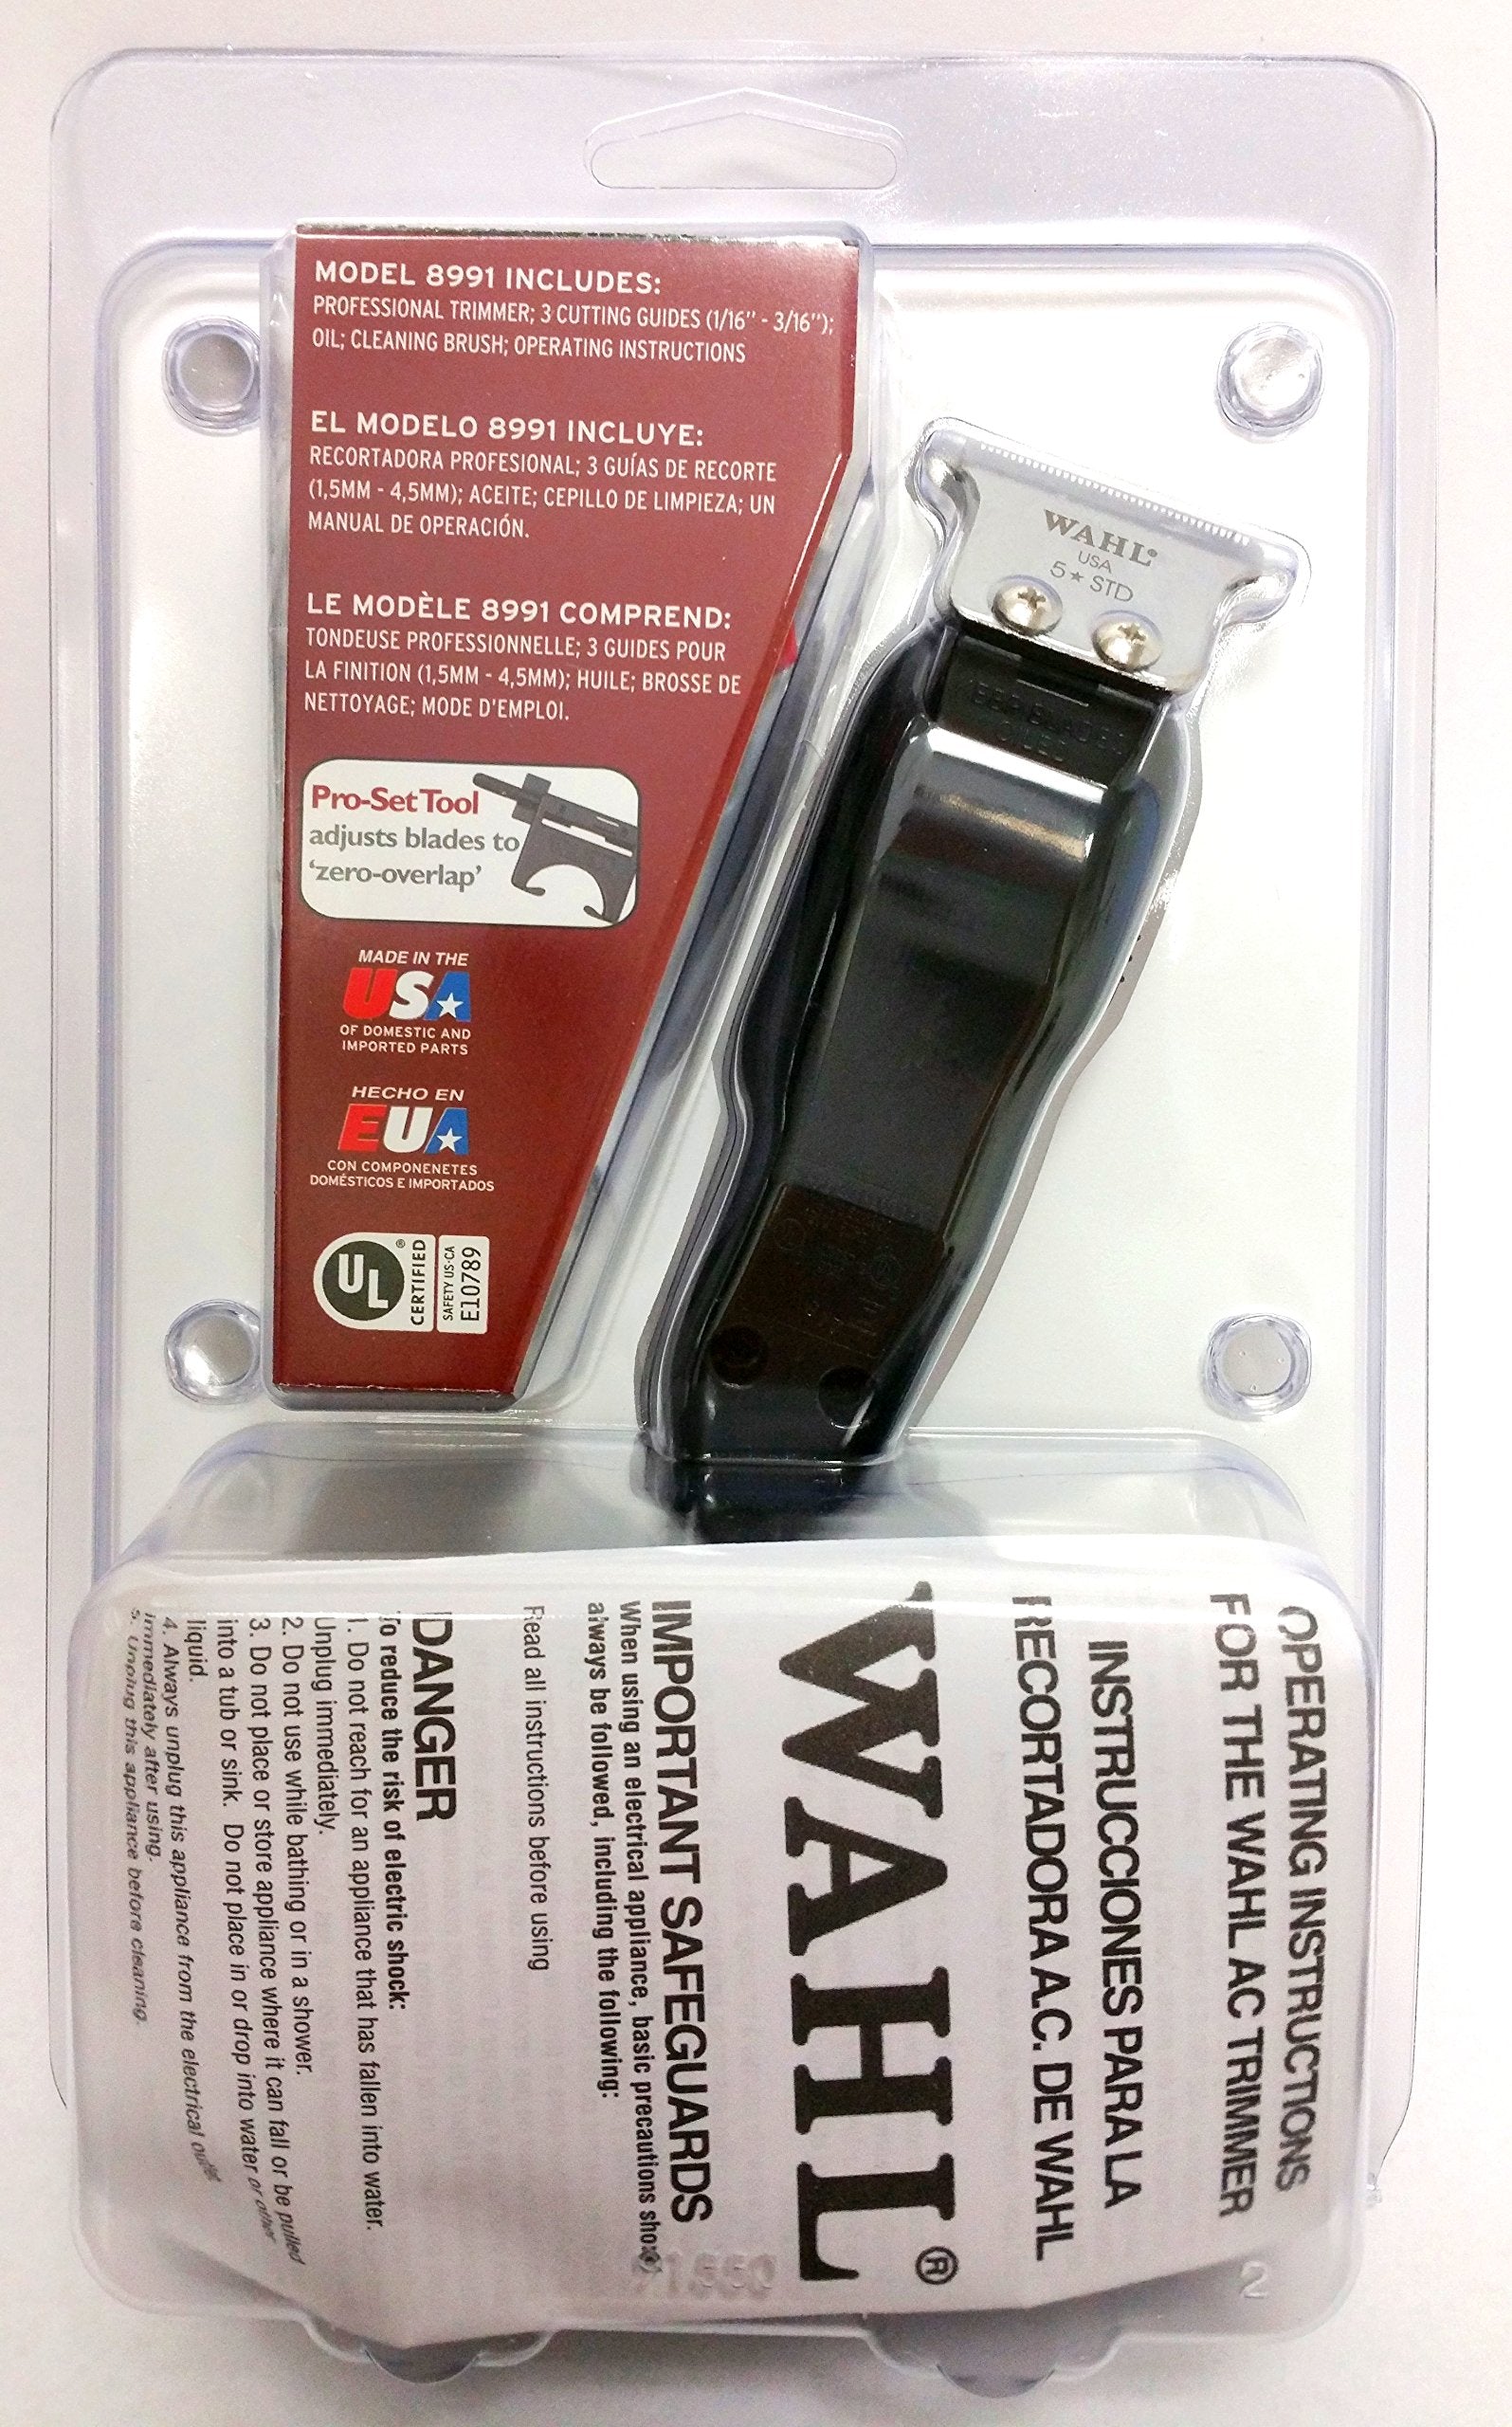 cleaning wahl trimmer